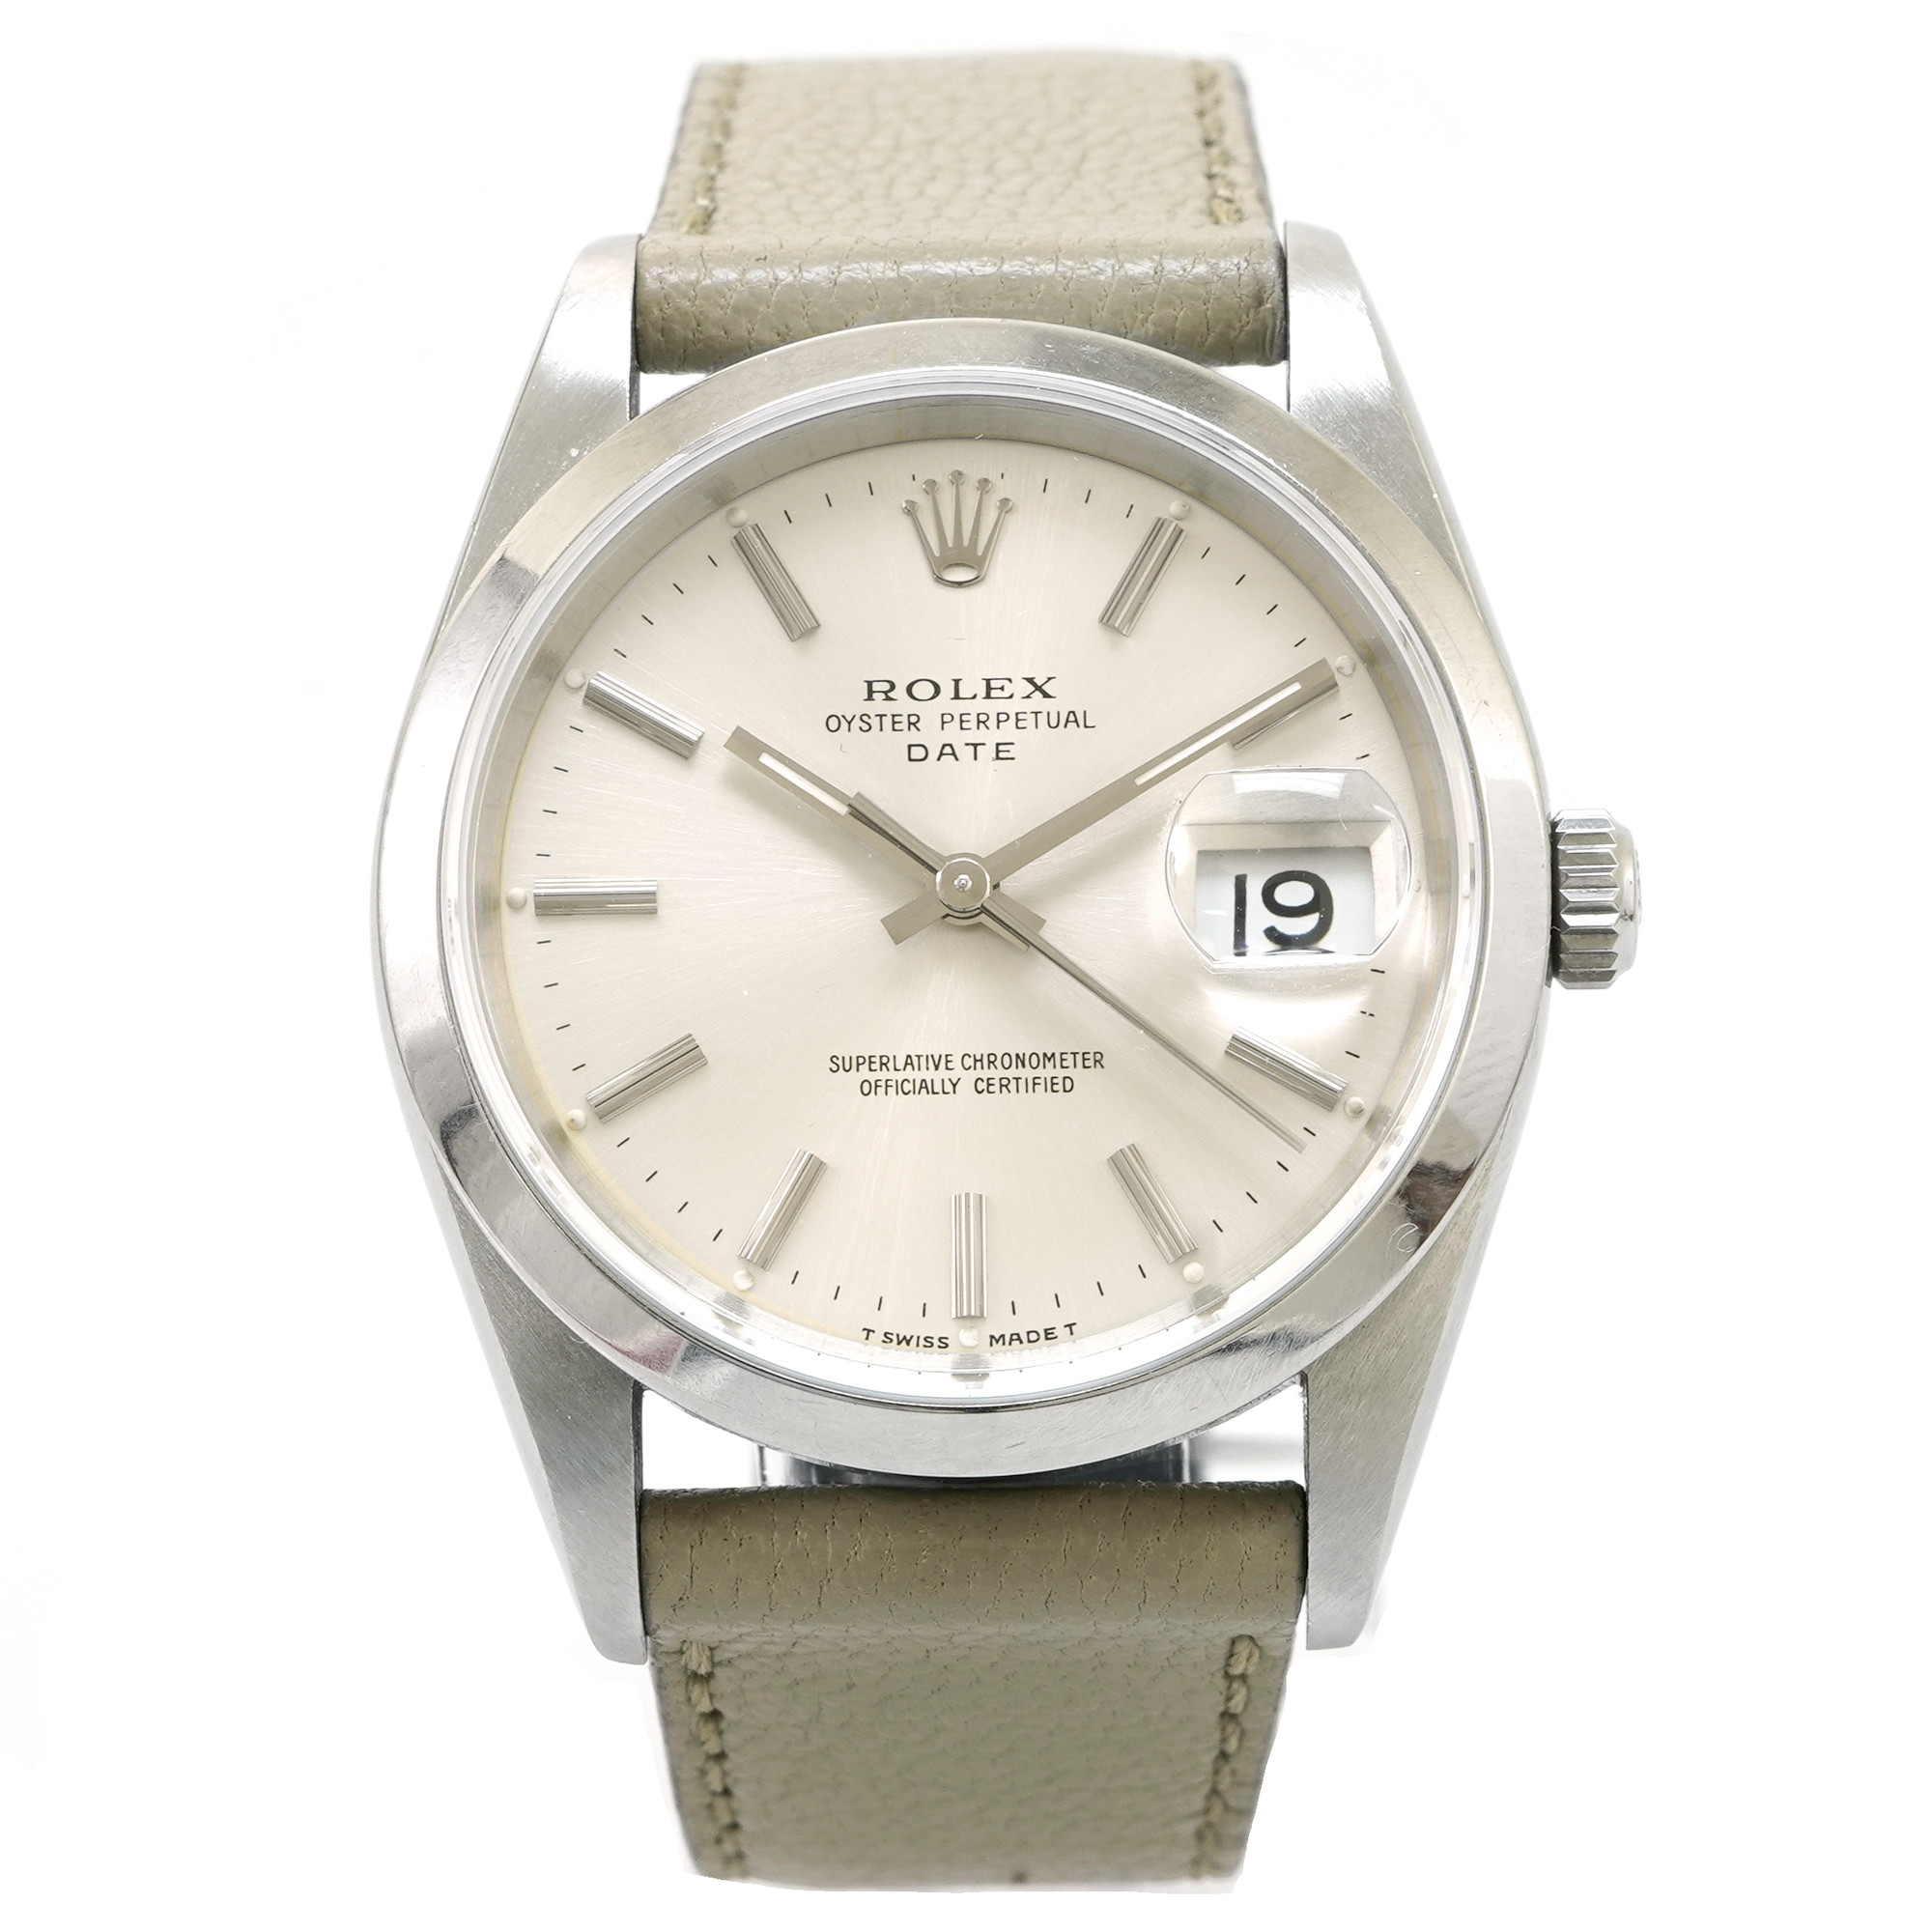 Rolex Oyster Perpetual Date 34mm 15200 - Inventory 5046